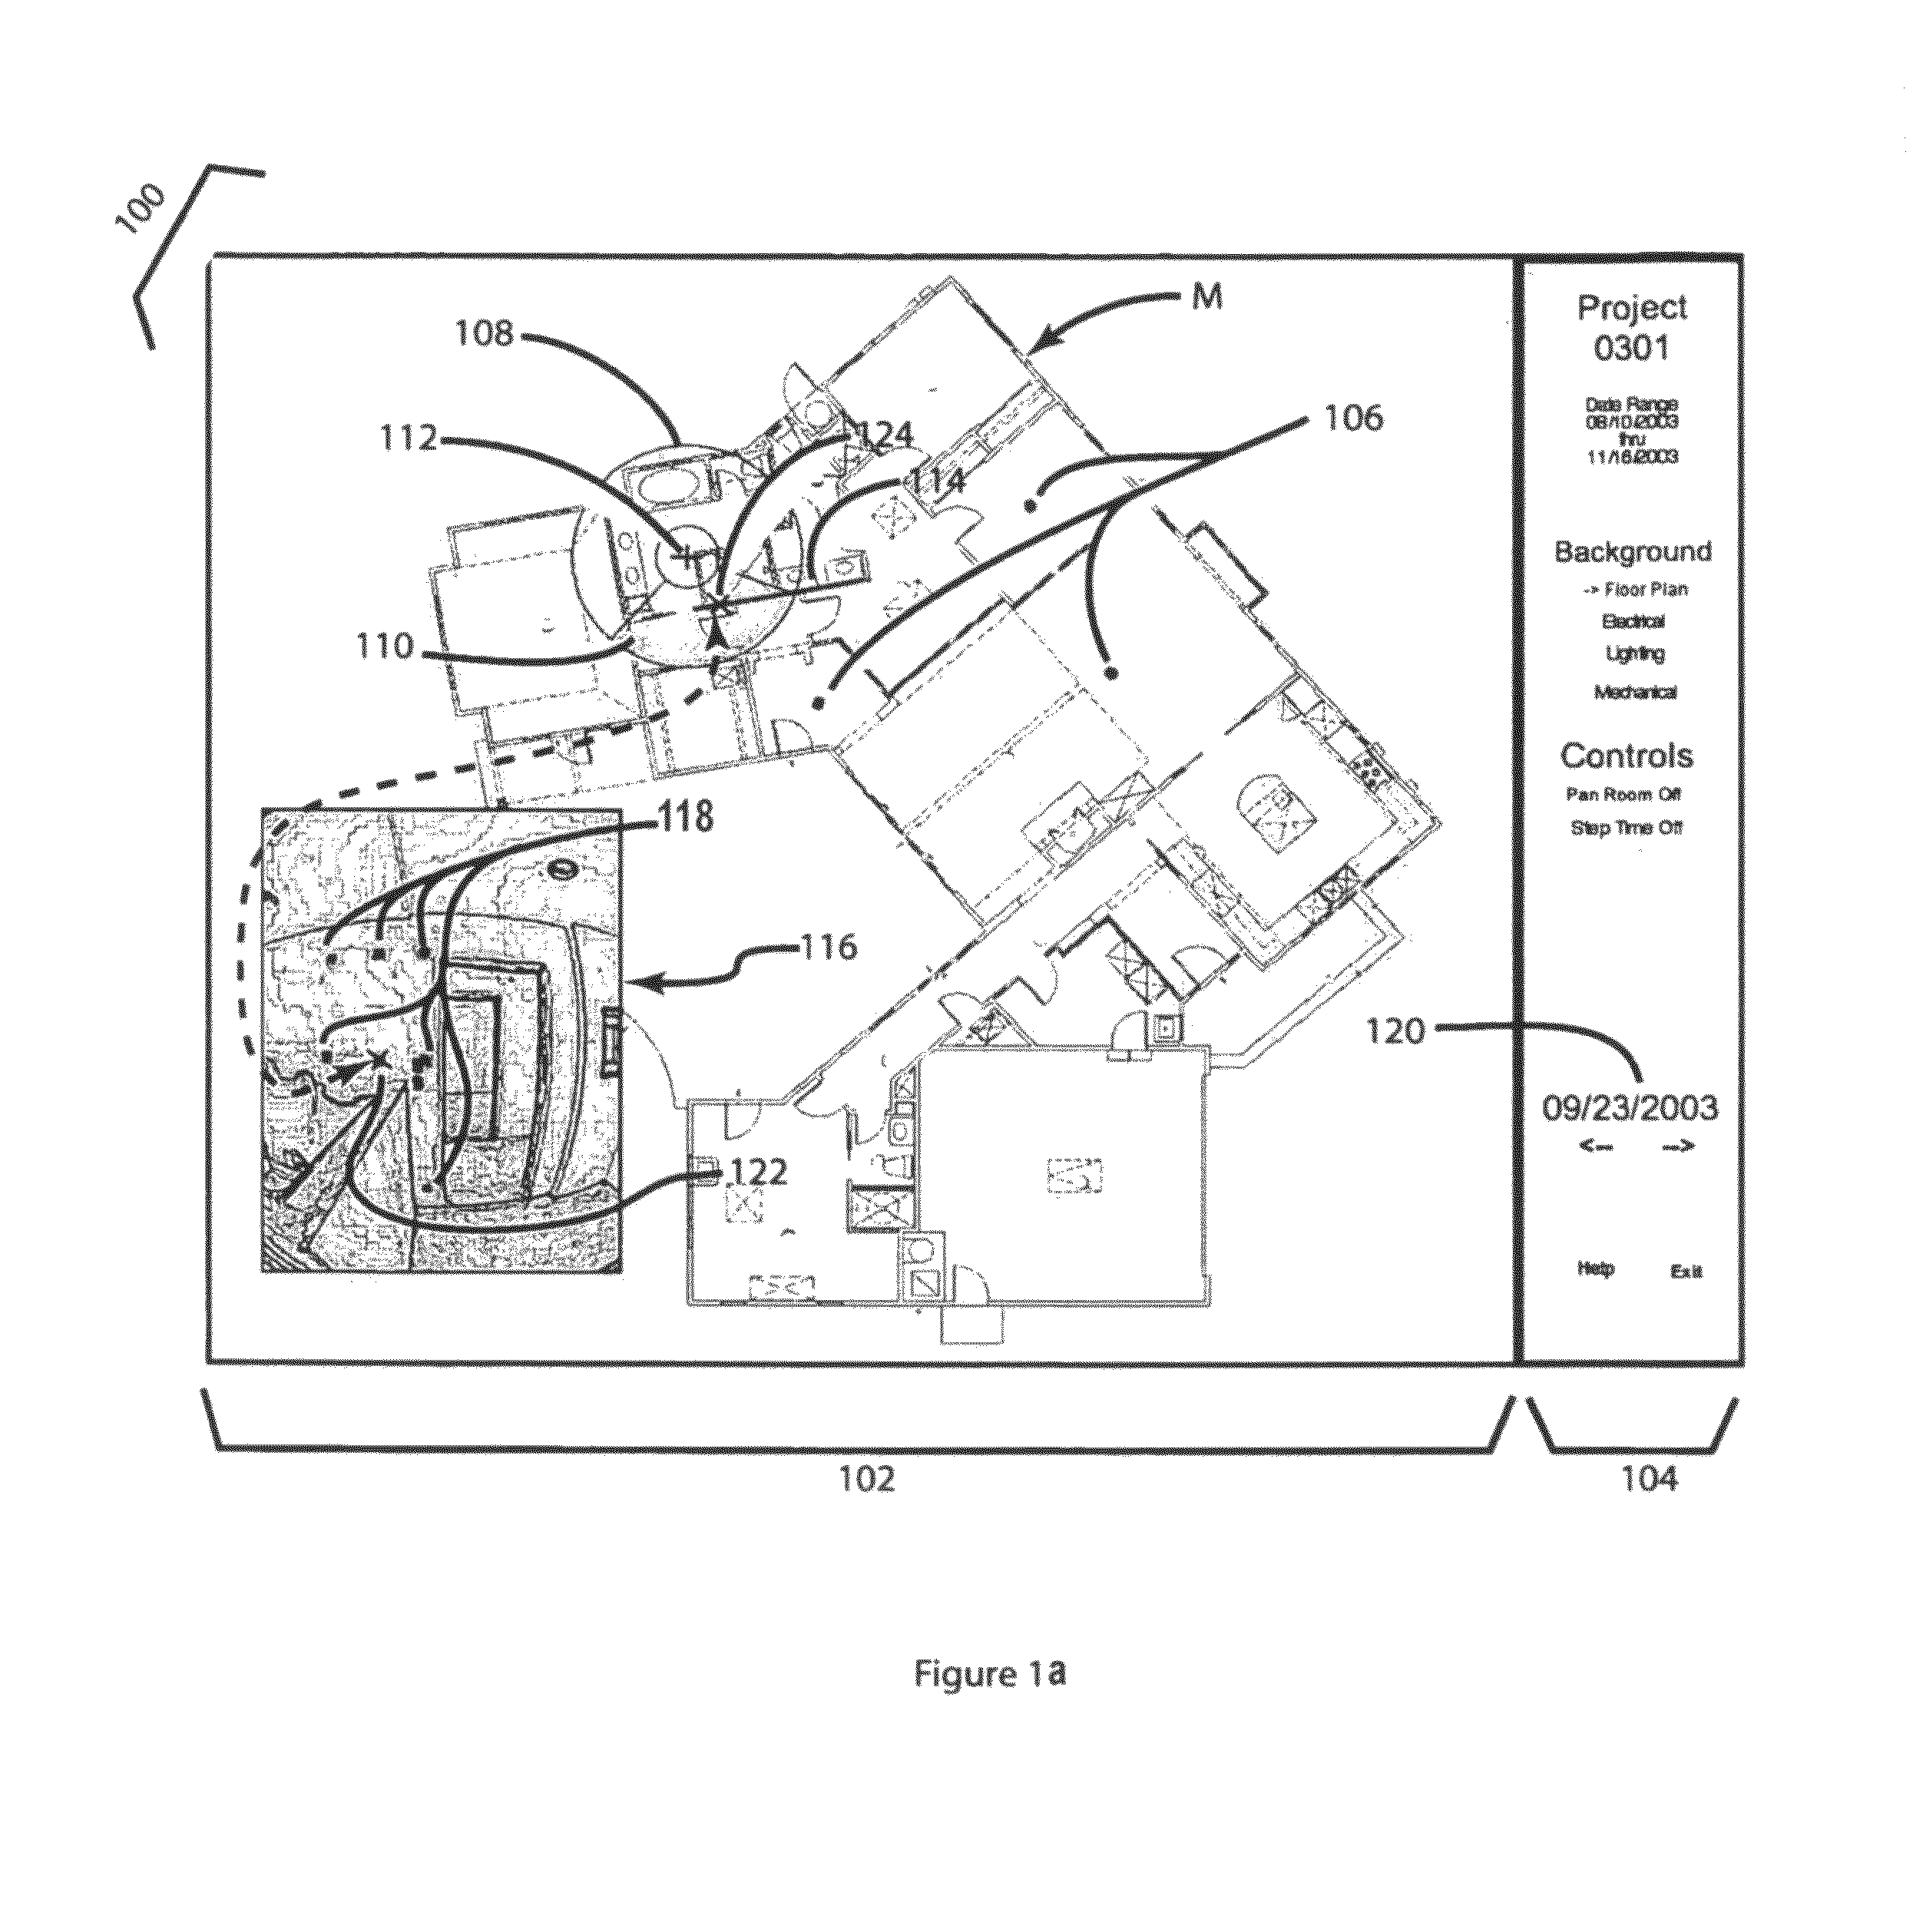 System for organizing and displaying registered images